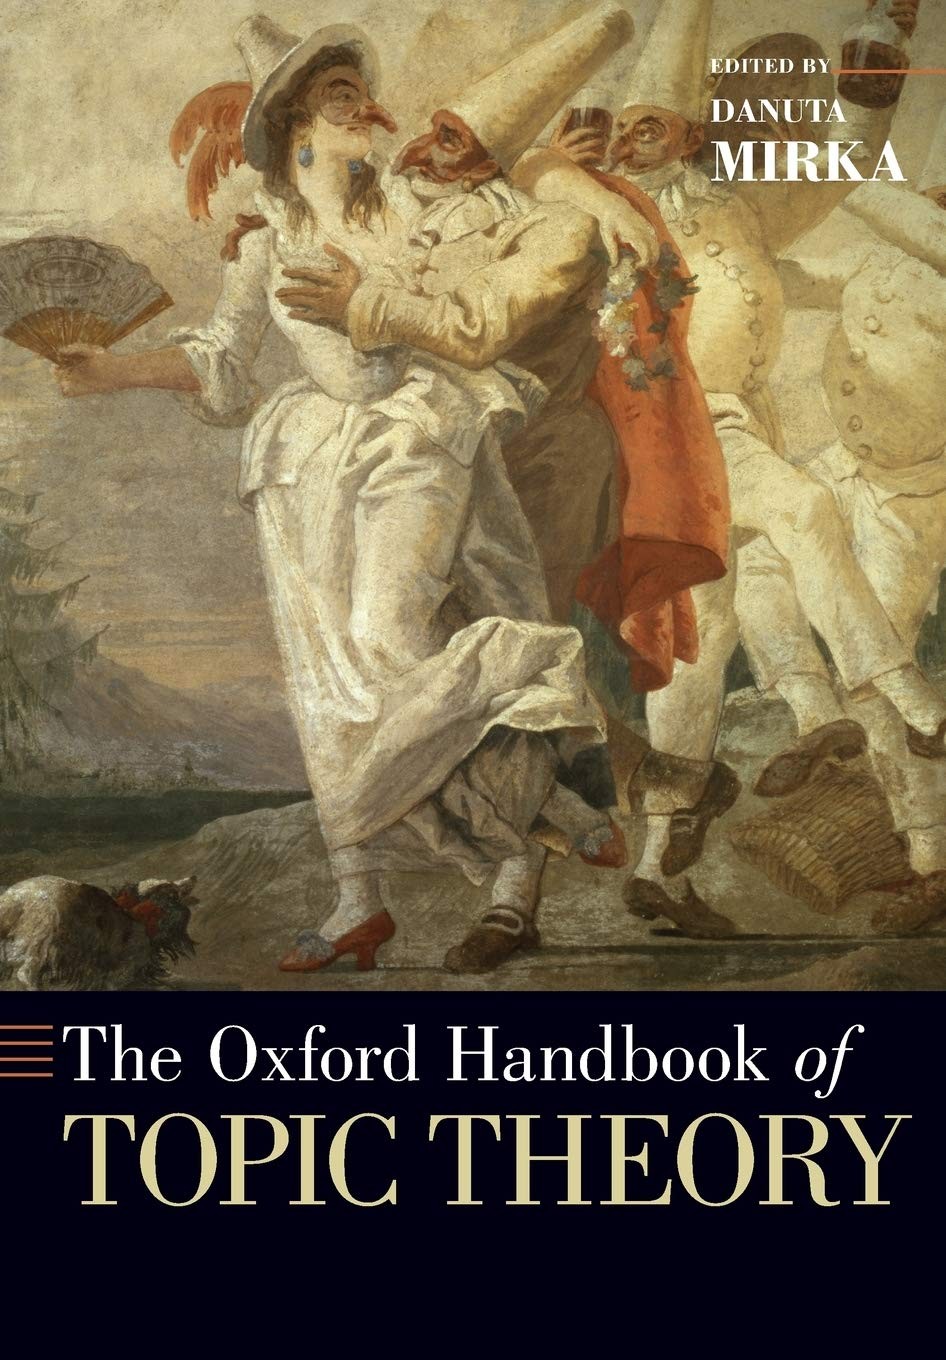 The Oxford Handbook of Topic Theory